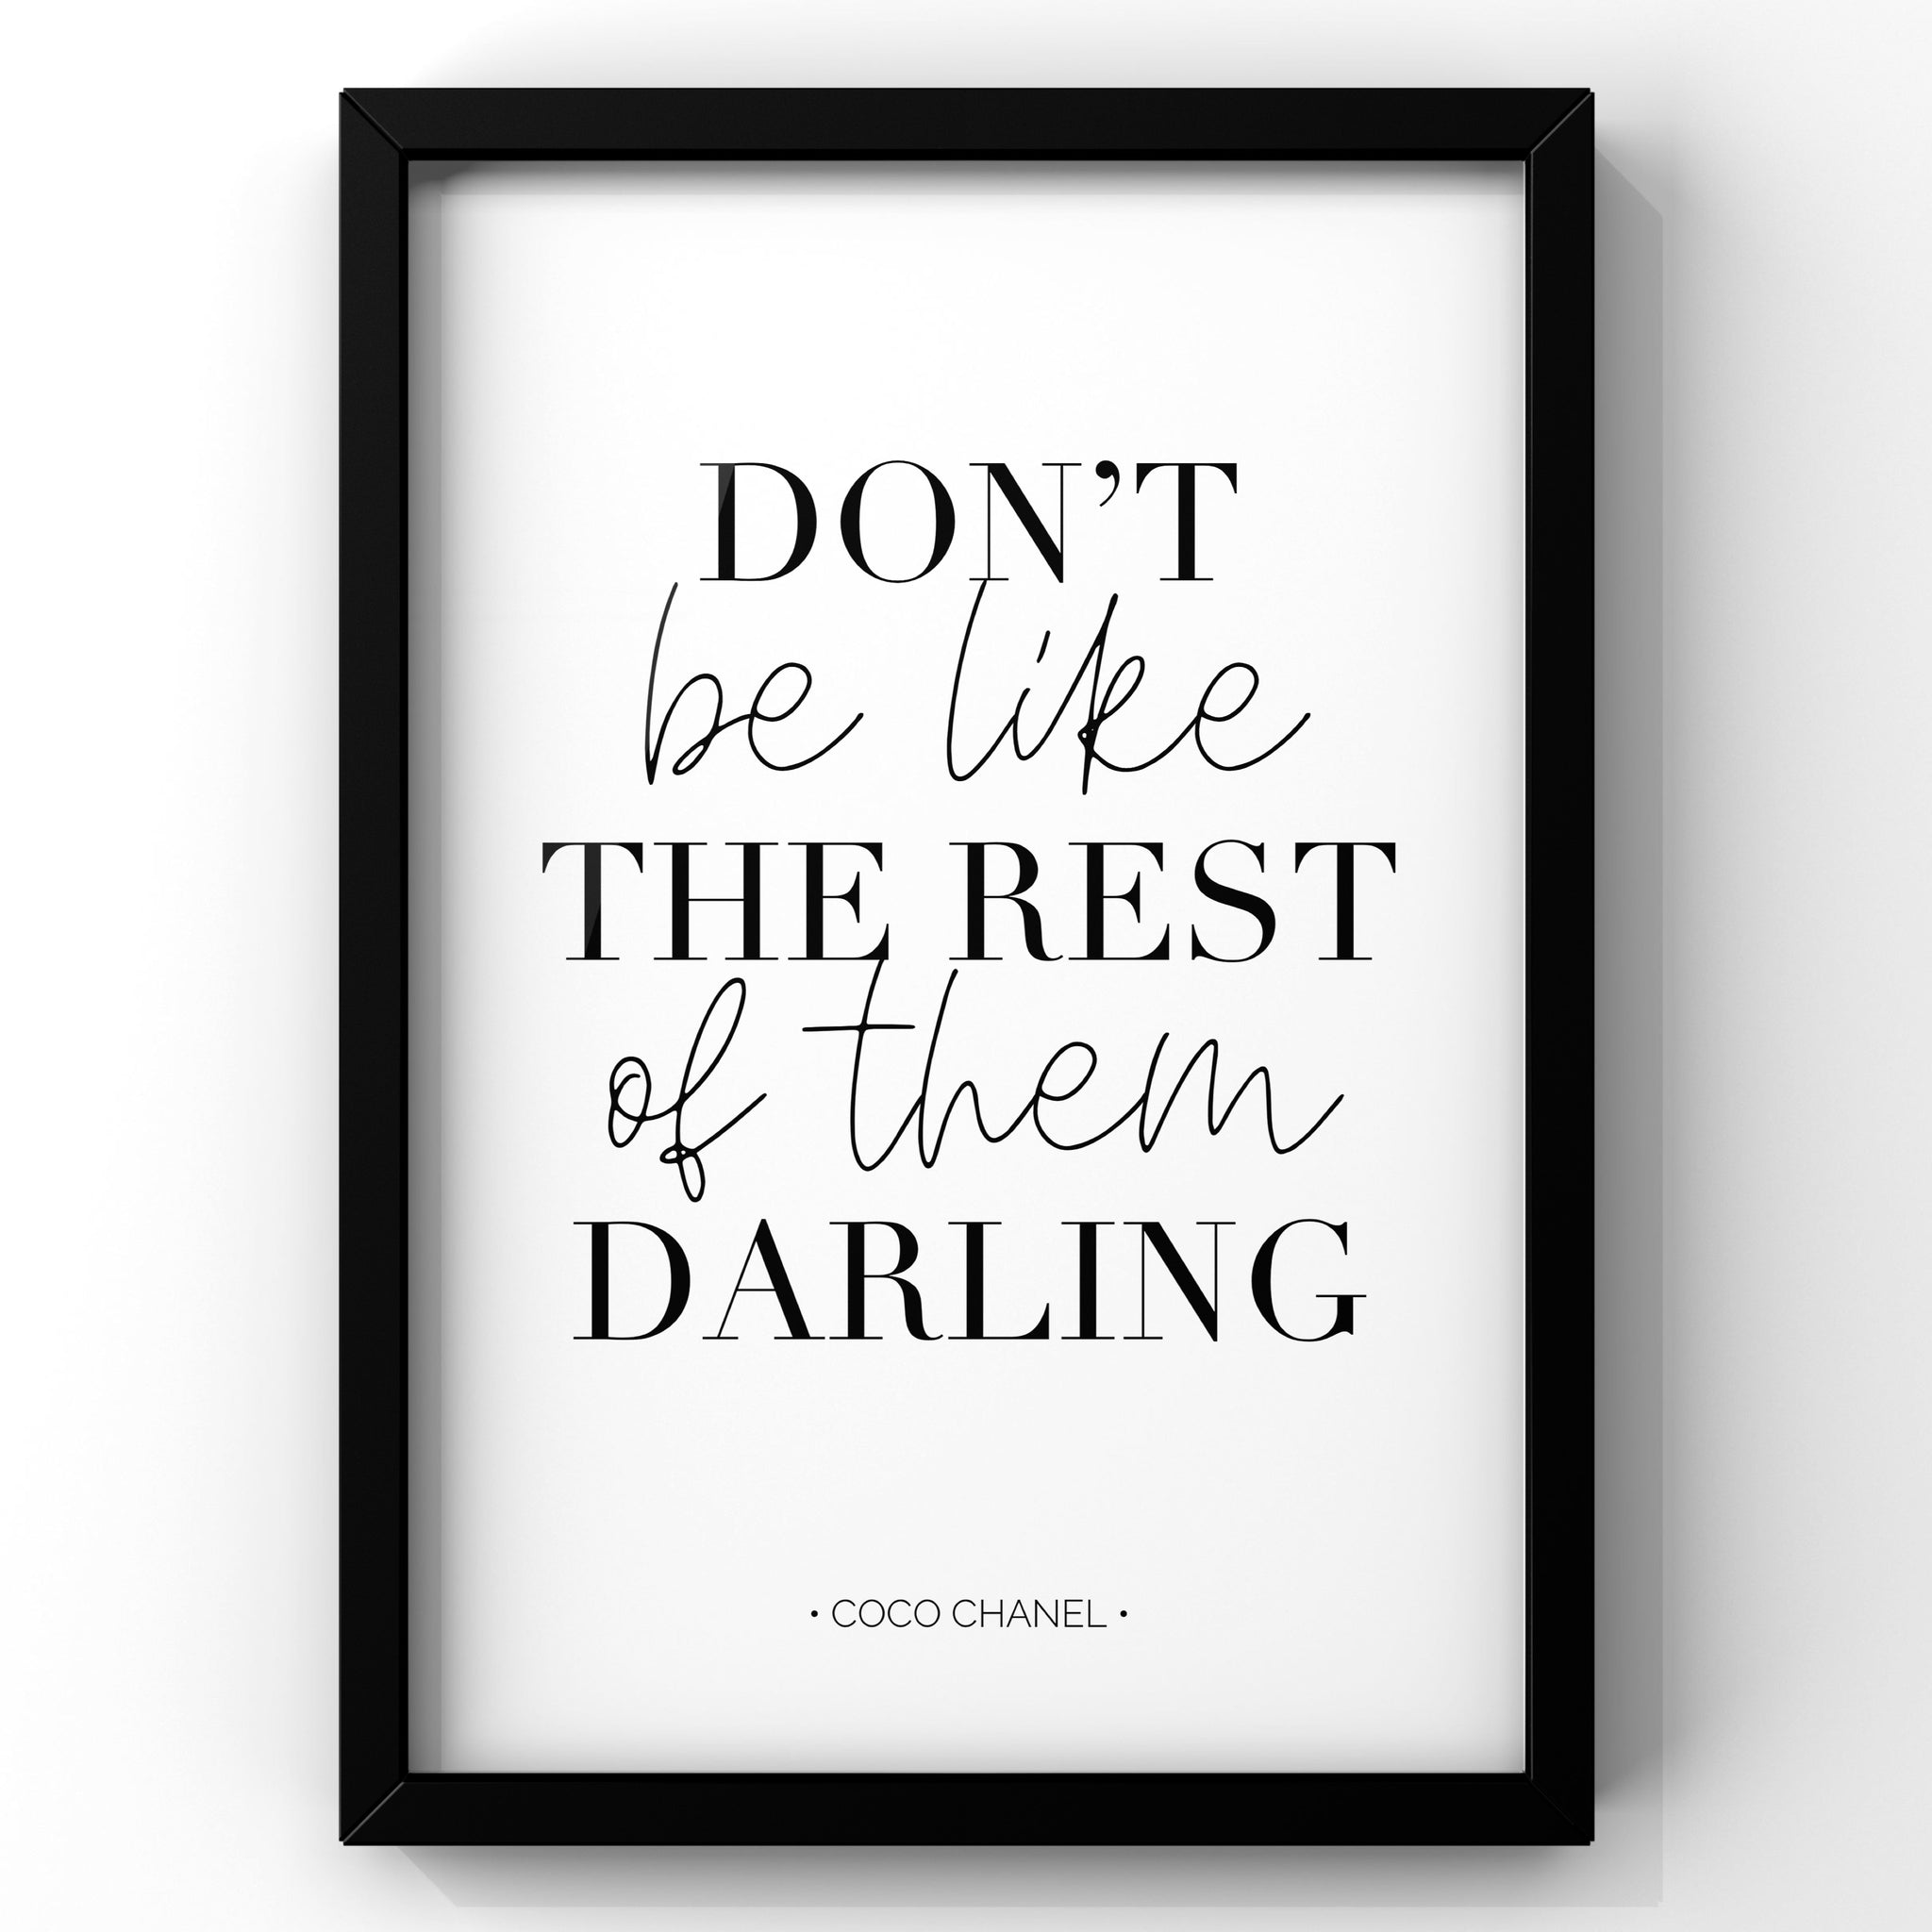 Don't be like the rest of them darling - Coco Chanel – Wolf & Bear Prints